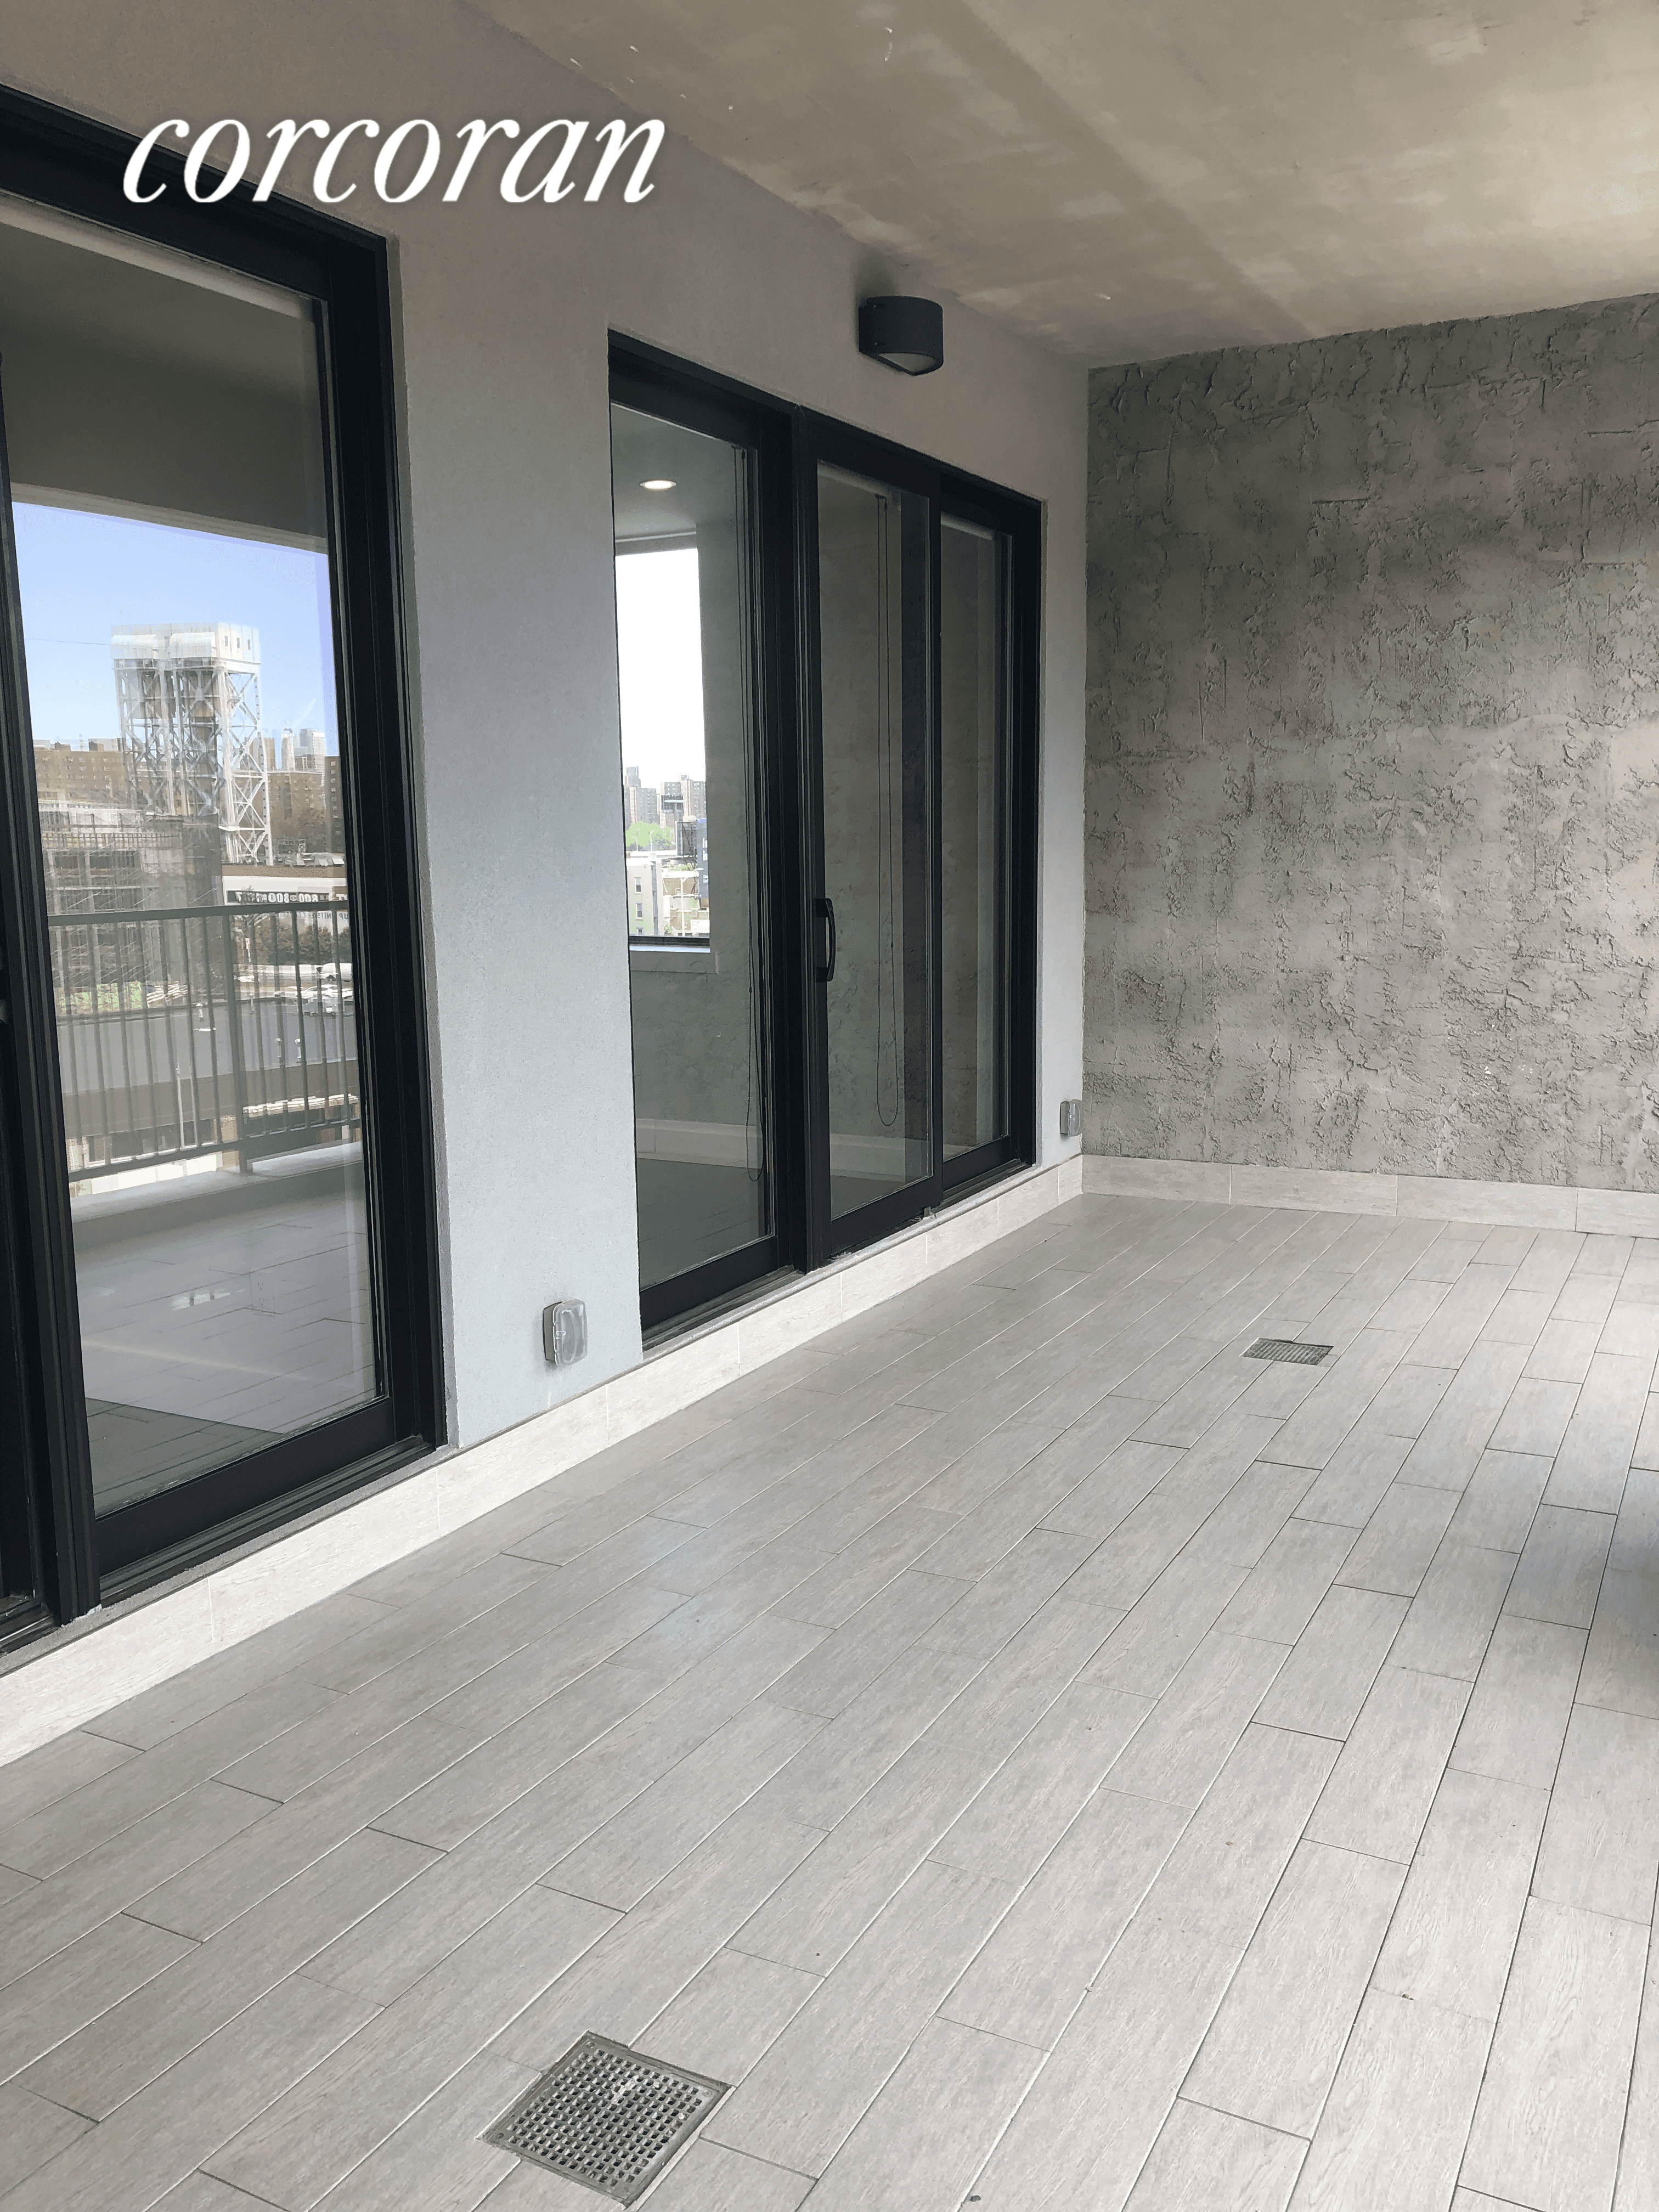 PENTHOUSE WITH EXPANSIVE VIEWS LARGE PRIVATE TERRACE WASHER DRYER IN UNIT BOTH BEDROOMS LEAD TO THE TERRACE 2 FULL BATHS Rent based on One month free on 12 months or ...